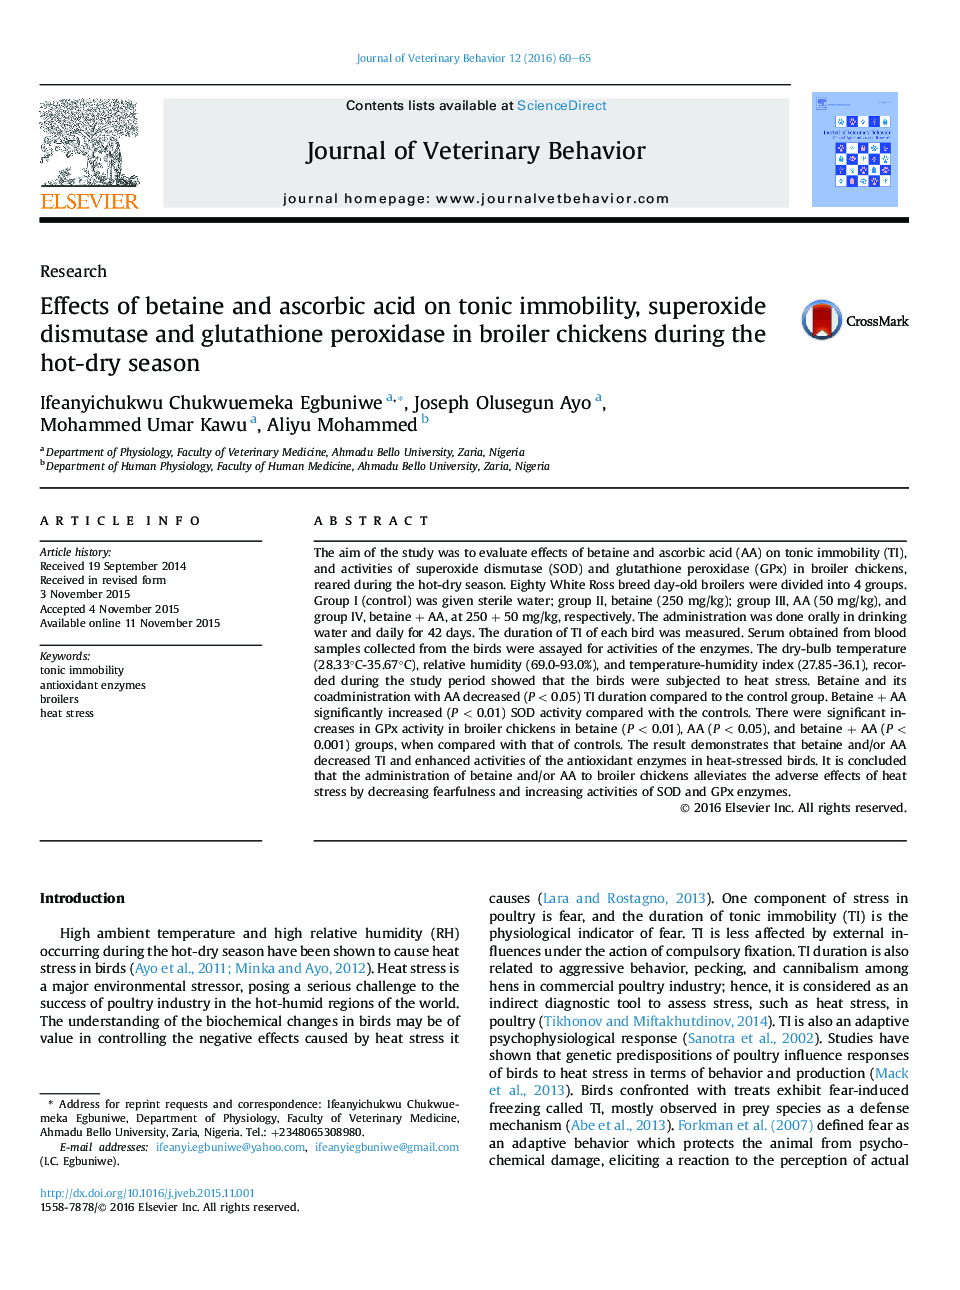 Effects of betaine and ascorbic acid on tonic immobility, superoxide dismutase and glutathione peroxidase in broiler chickens during the hot-dry season